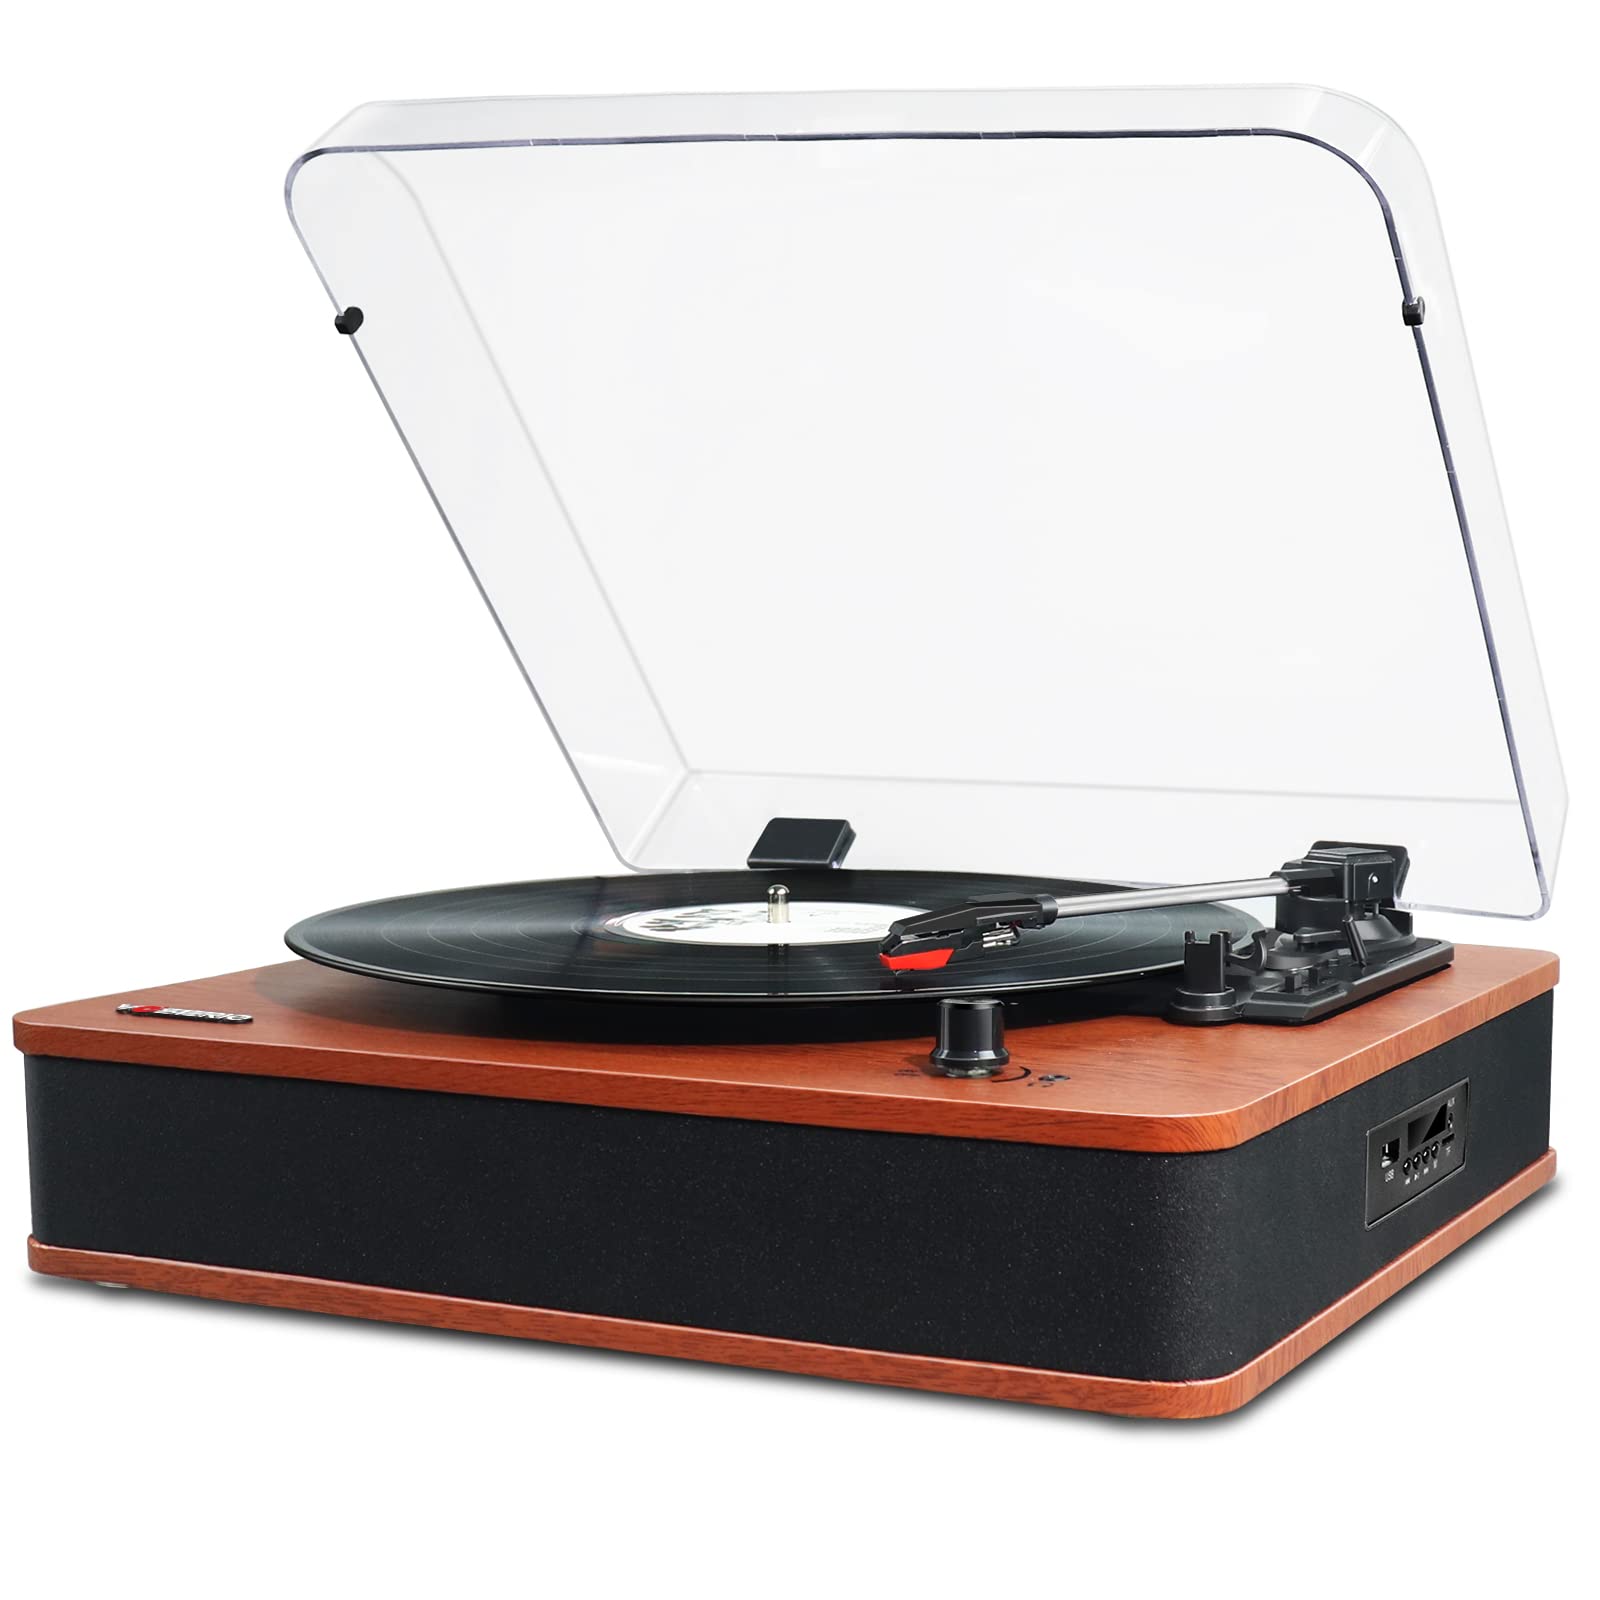 Vosterio Record Player Turntable with Speakers for Vinyl Records, Vintage Bluetooth Belt Drive LP Player with FM Radio, USB, TF Recording, Aux in & LED Display